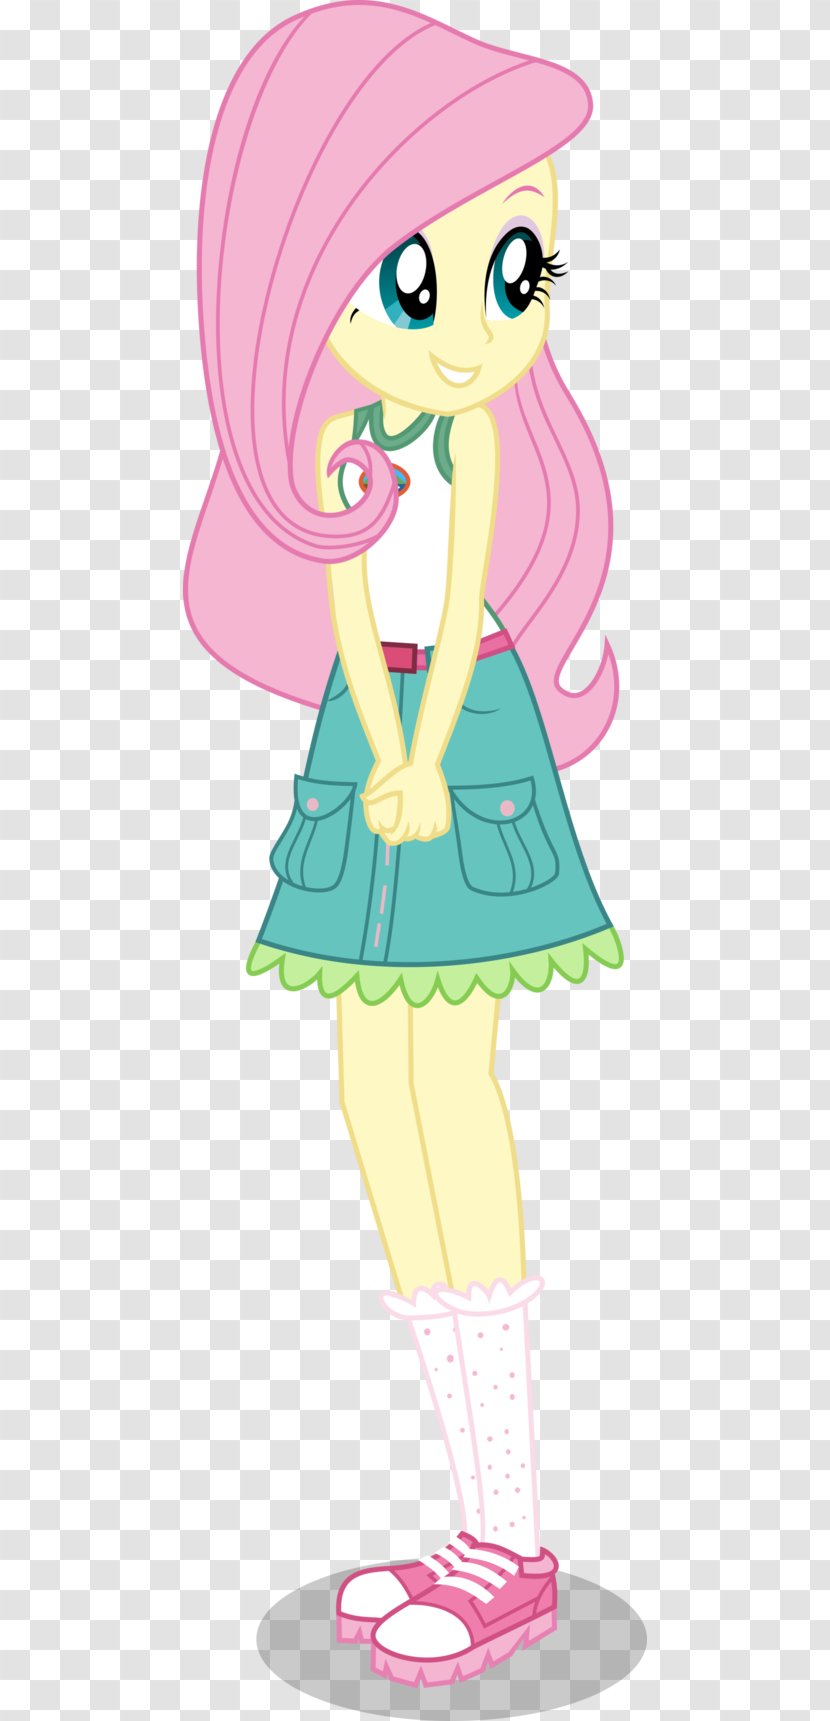 Fluttershy Sunset Shimmer Pinkie Pie Twilight Sparkle Rarity - Silhouette - Equestria Girls Transparent PNG